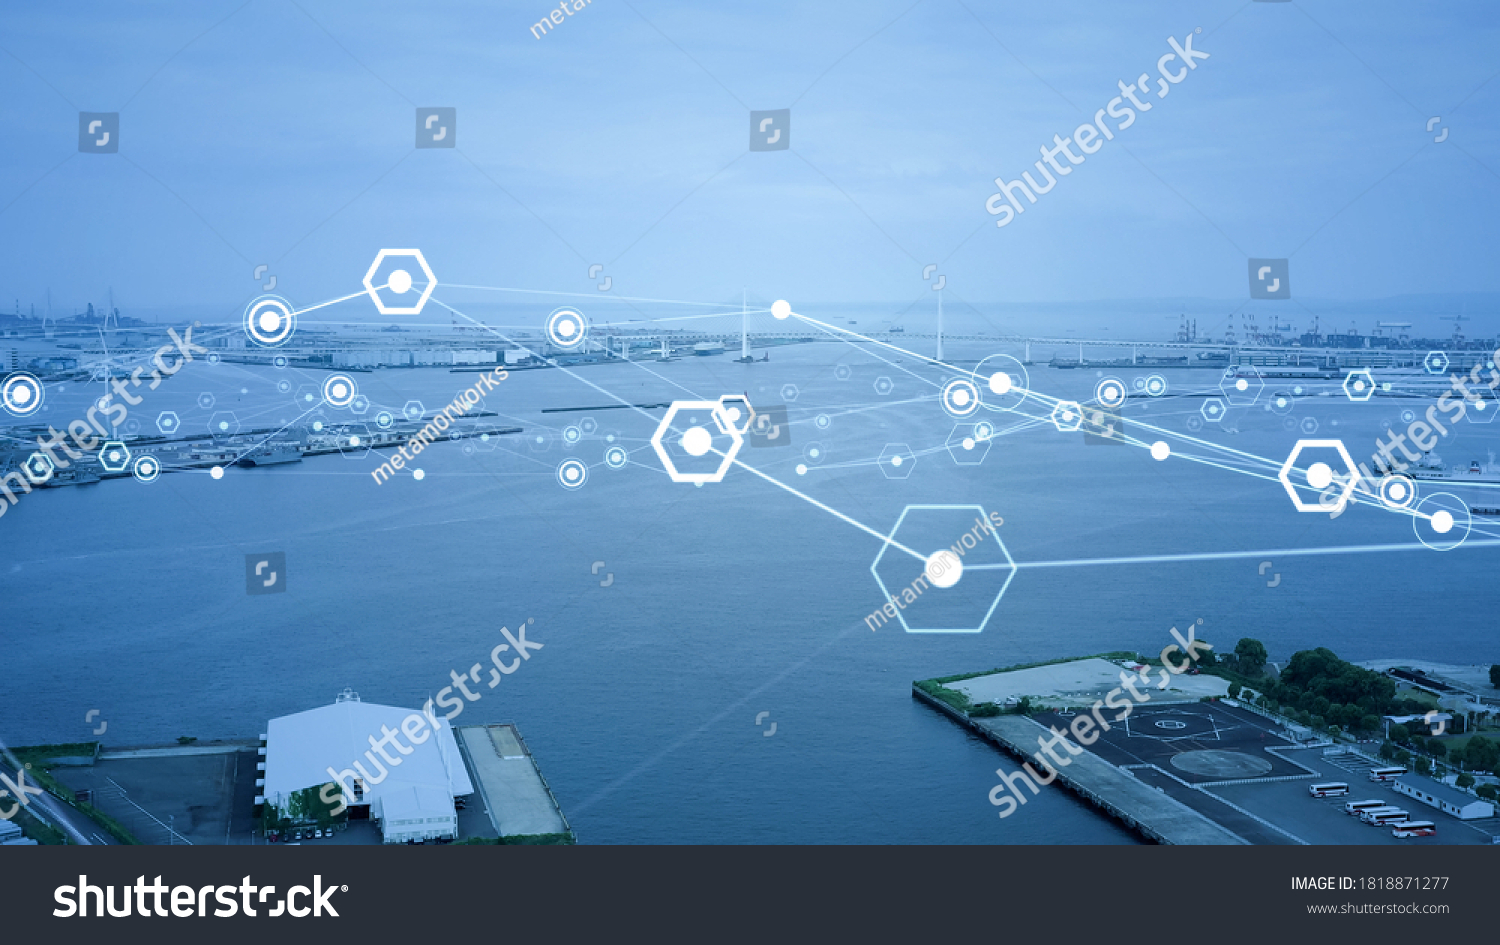 Ships and communication network concept. maritime traffic. #1818871277